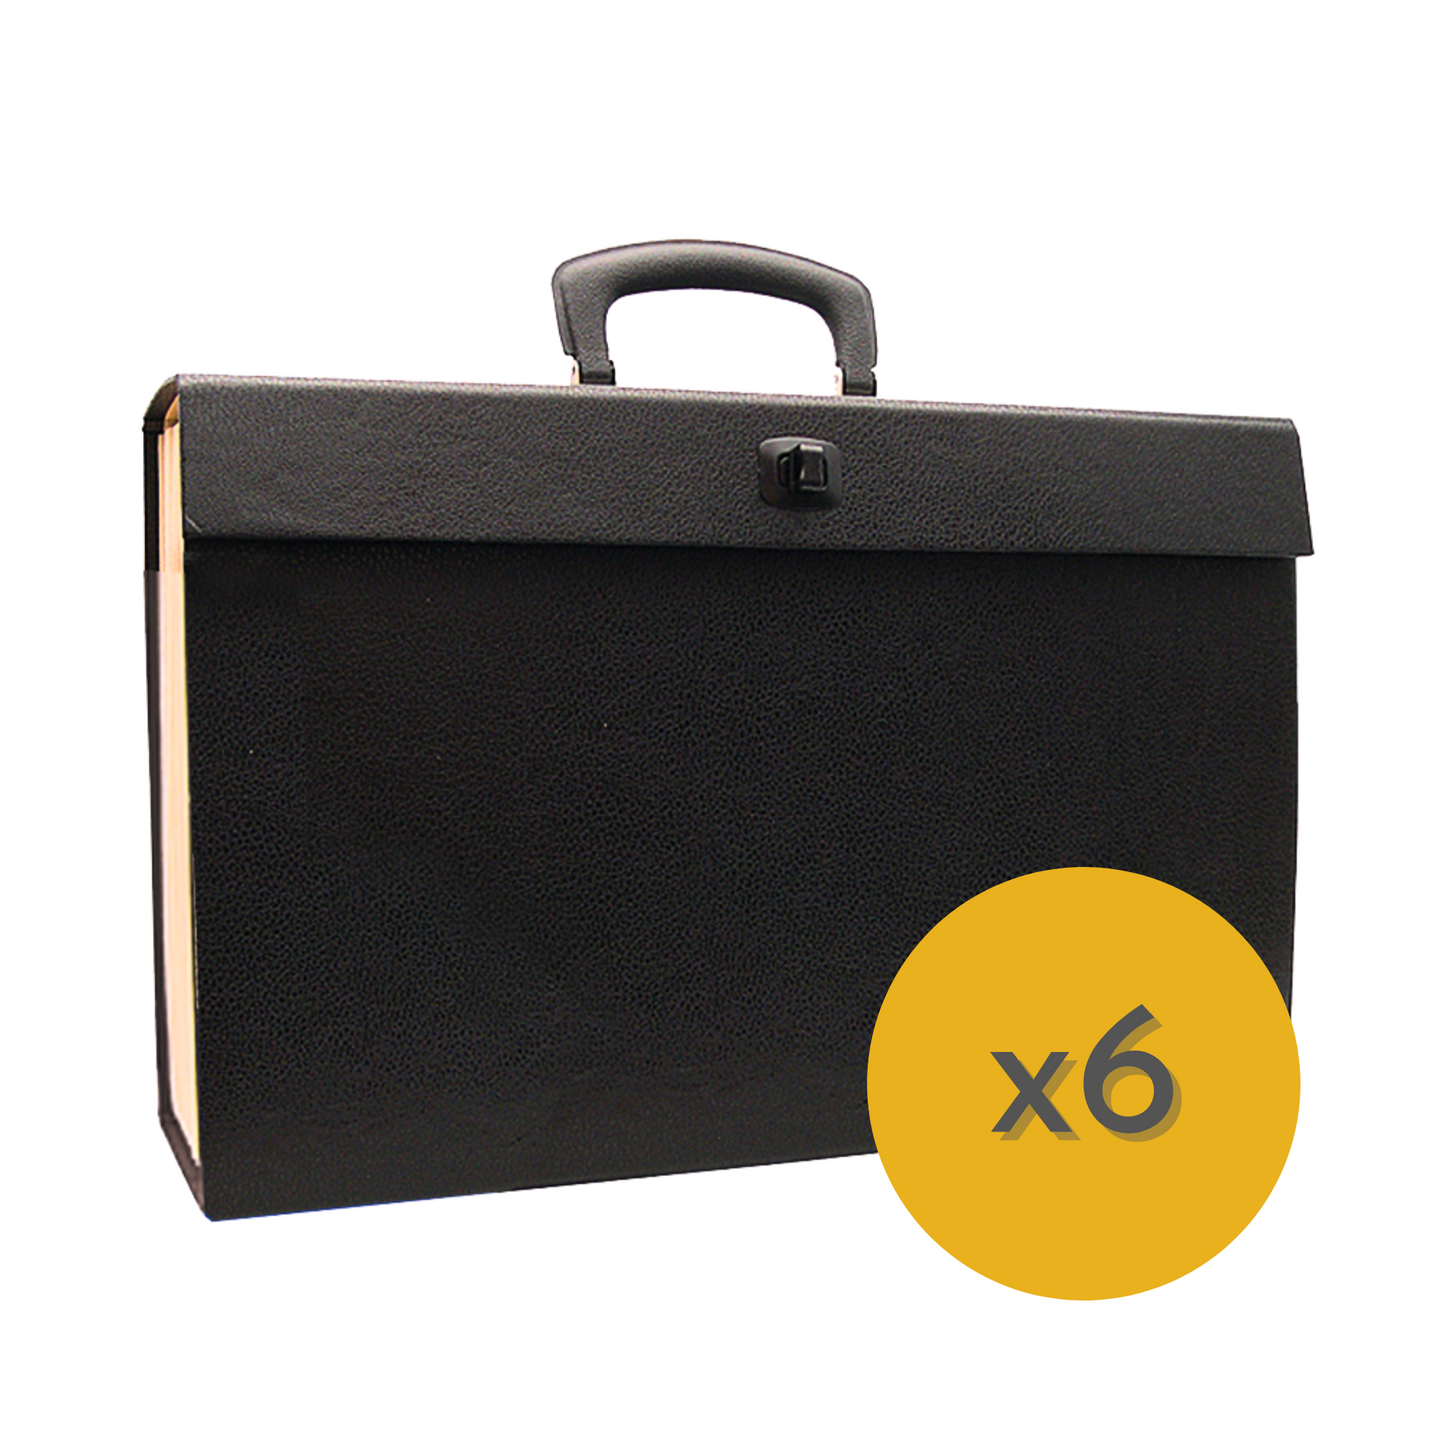 The image displays a black, textured expanding file case with a handle and a clasp for secure closure. It's a portable filing solution typically used for organizing and transporting documents. A yellow circle with the inscription "x6" shows that this product is available as part of a pack of six, indicating a bulk purchase or a package deal. The design suggests practicality and convenience for users needing to carry and access their files on the go.